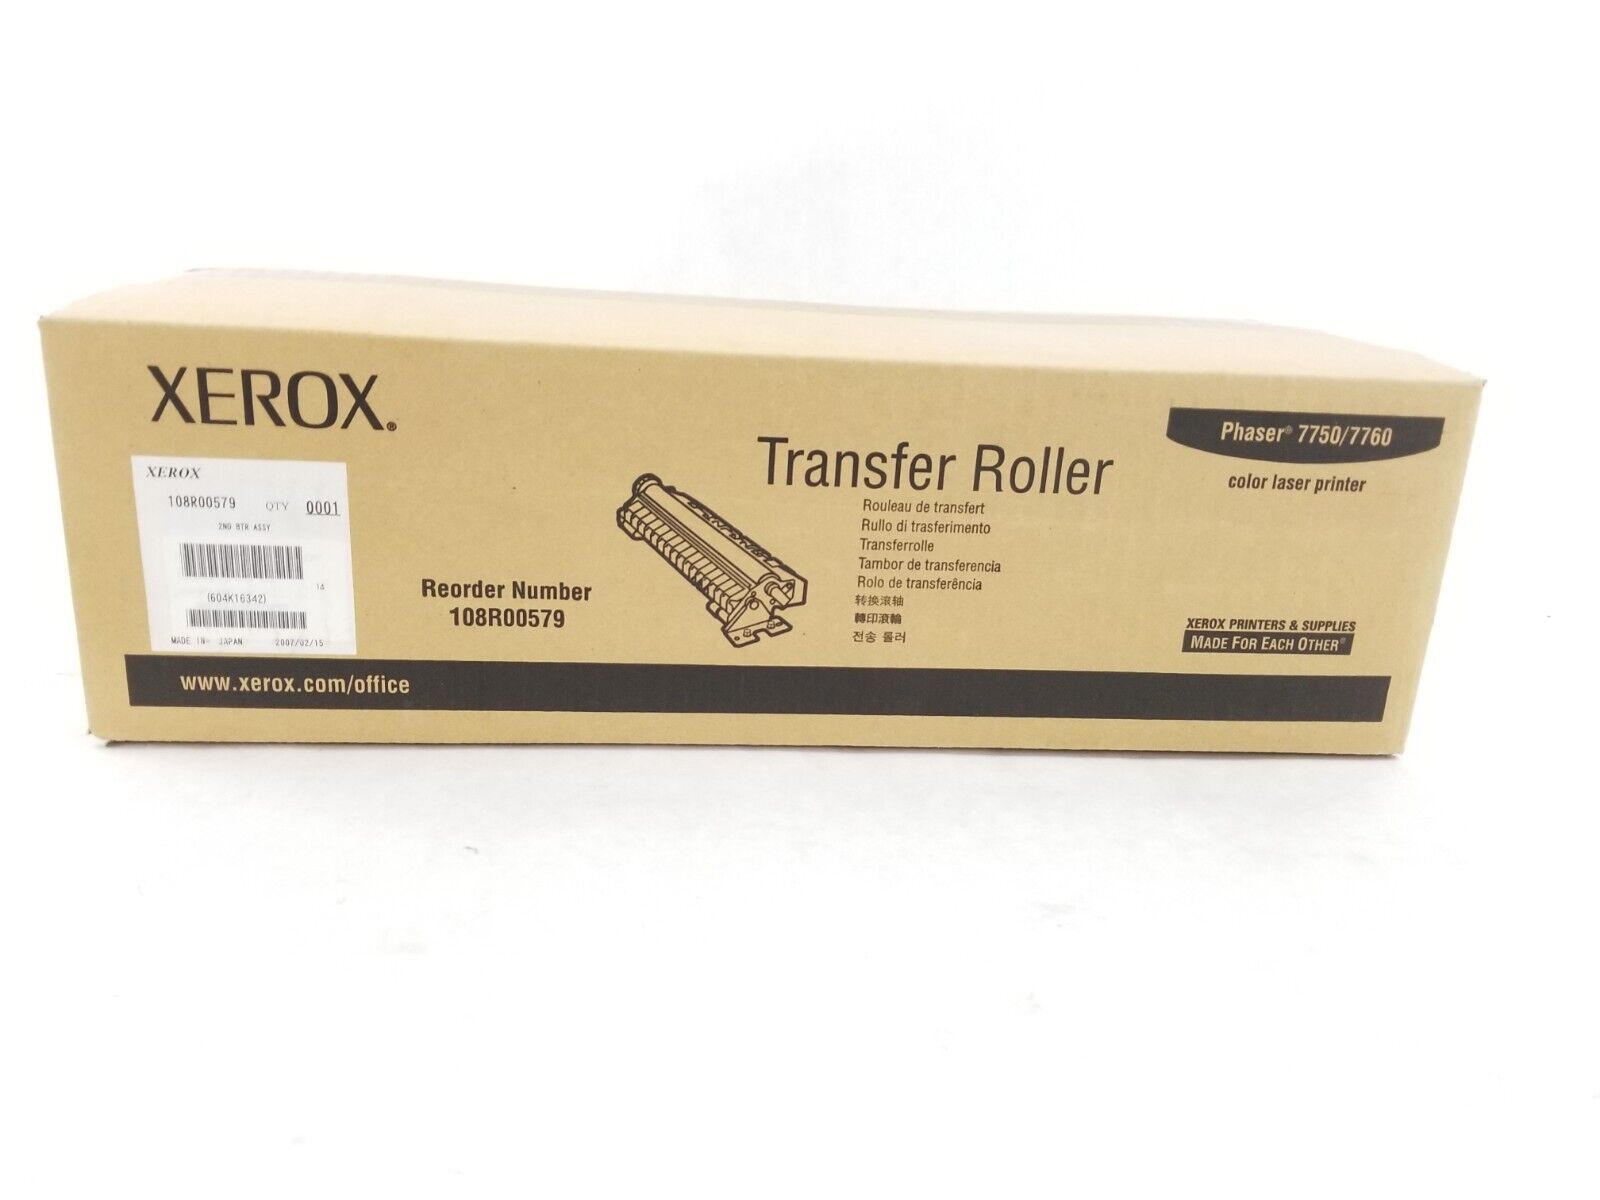 XEROX 108R00579 Transfer Roller Phaser 7750 7760 Color NEW Genuine Sealed in Box